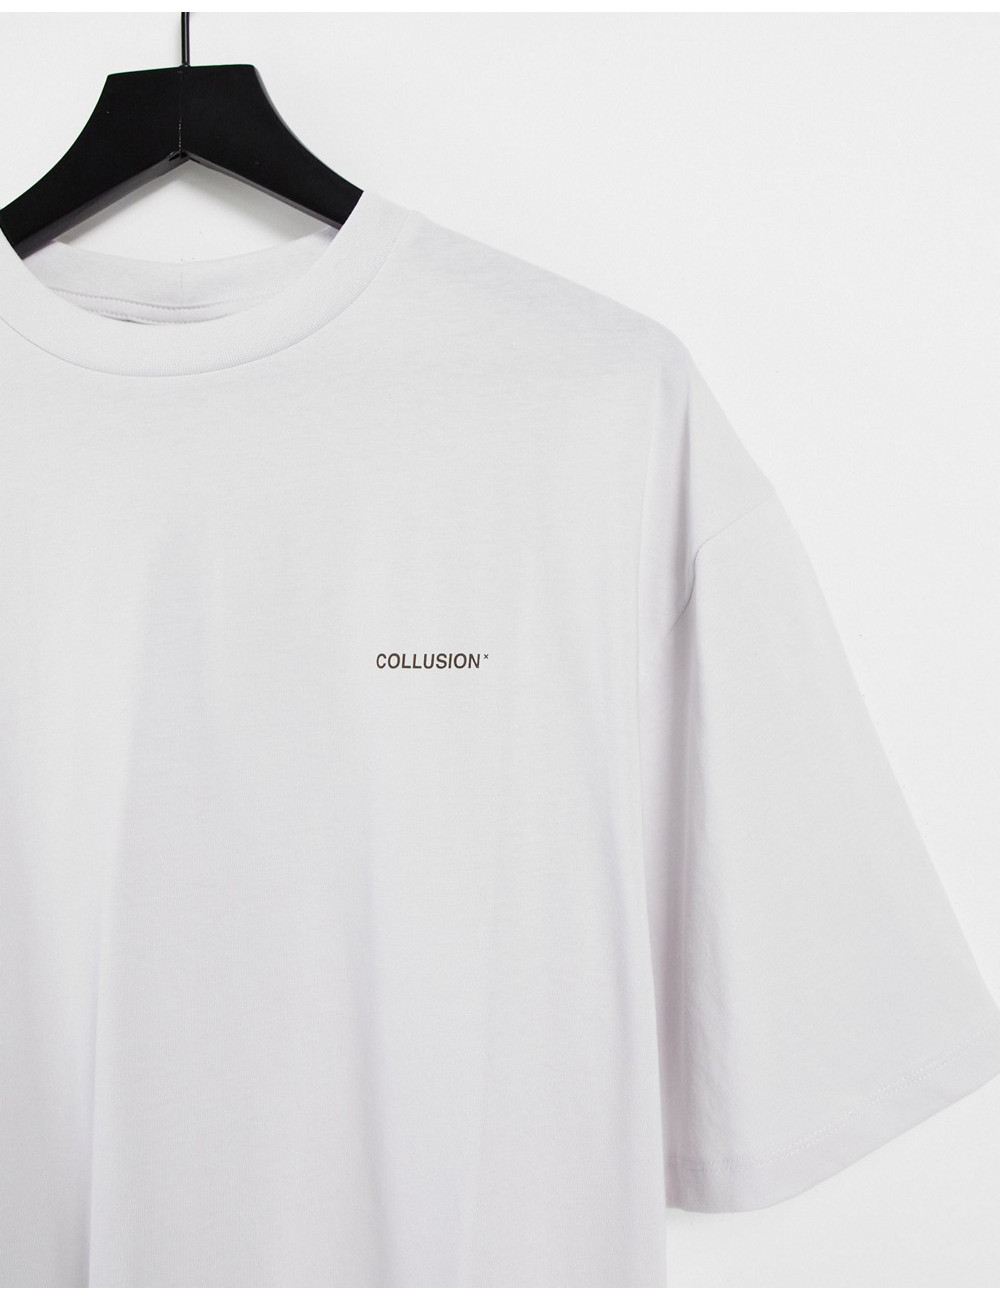 COLLUSION logo t-shirt in...